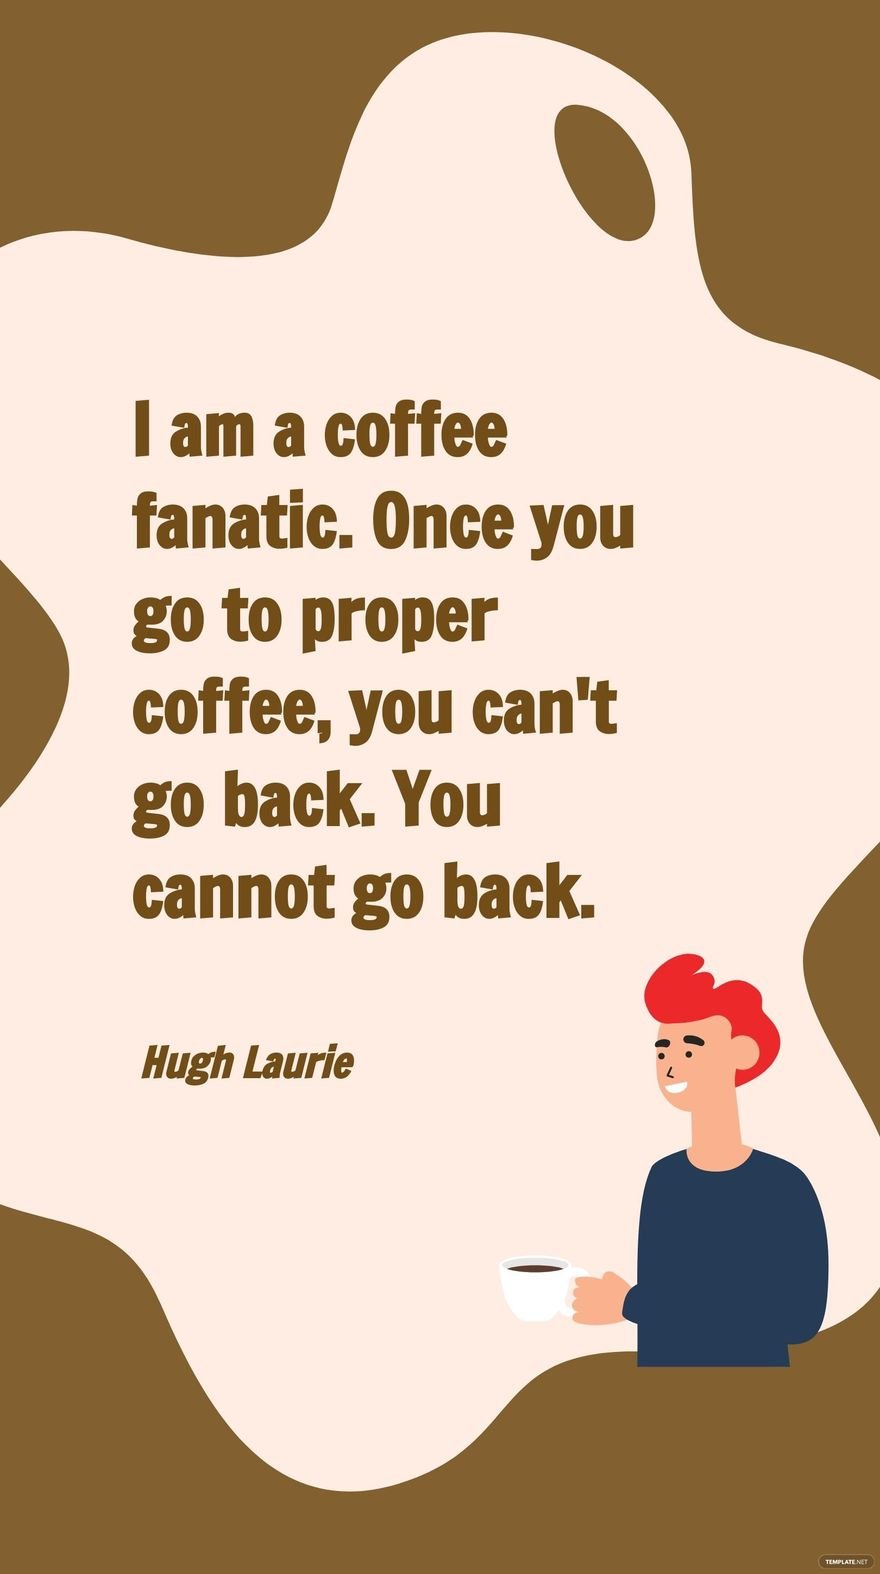 Hugh Laurie - I am a coffee fanatic. Once you go to proper coffee, you can't go back. You cannot go back.